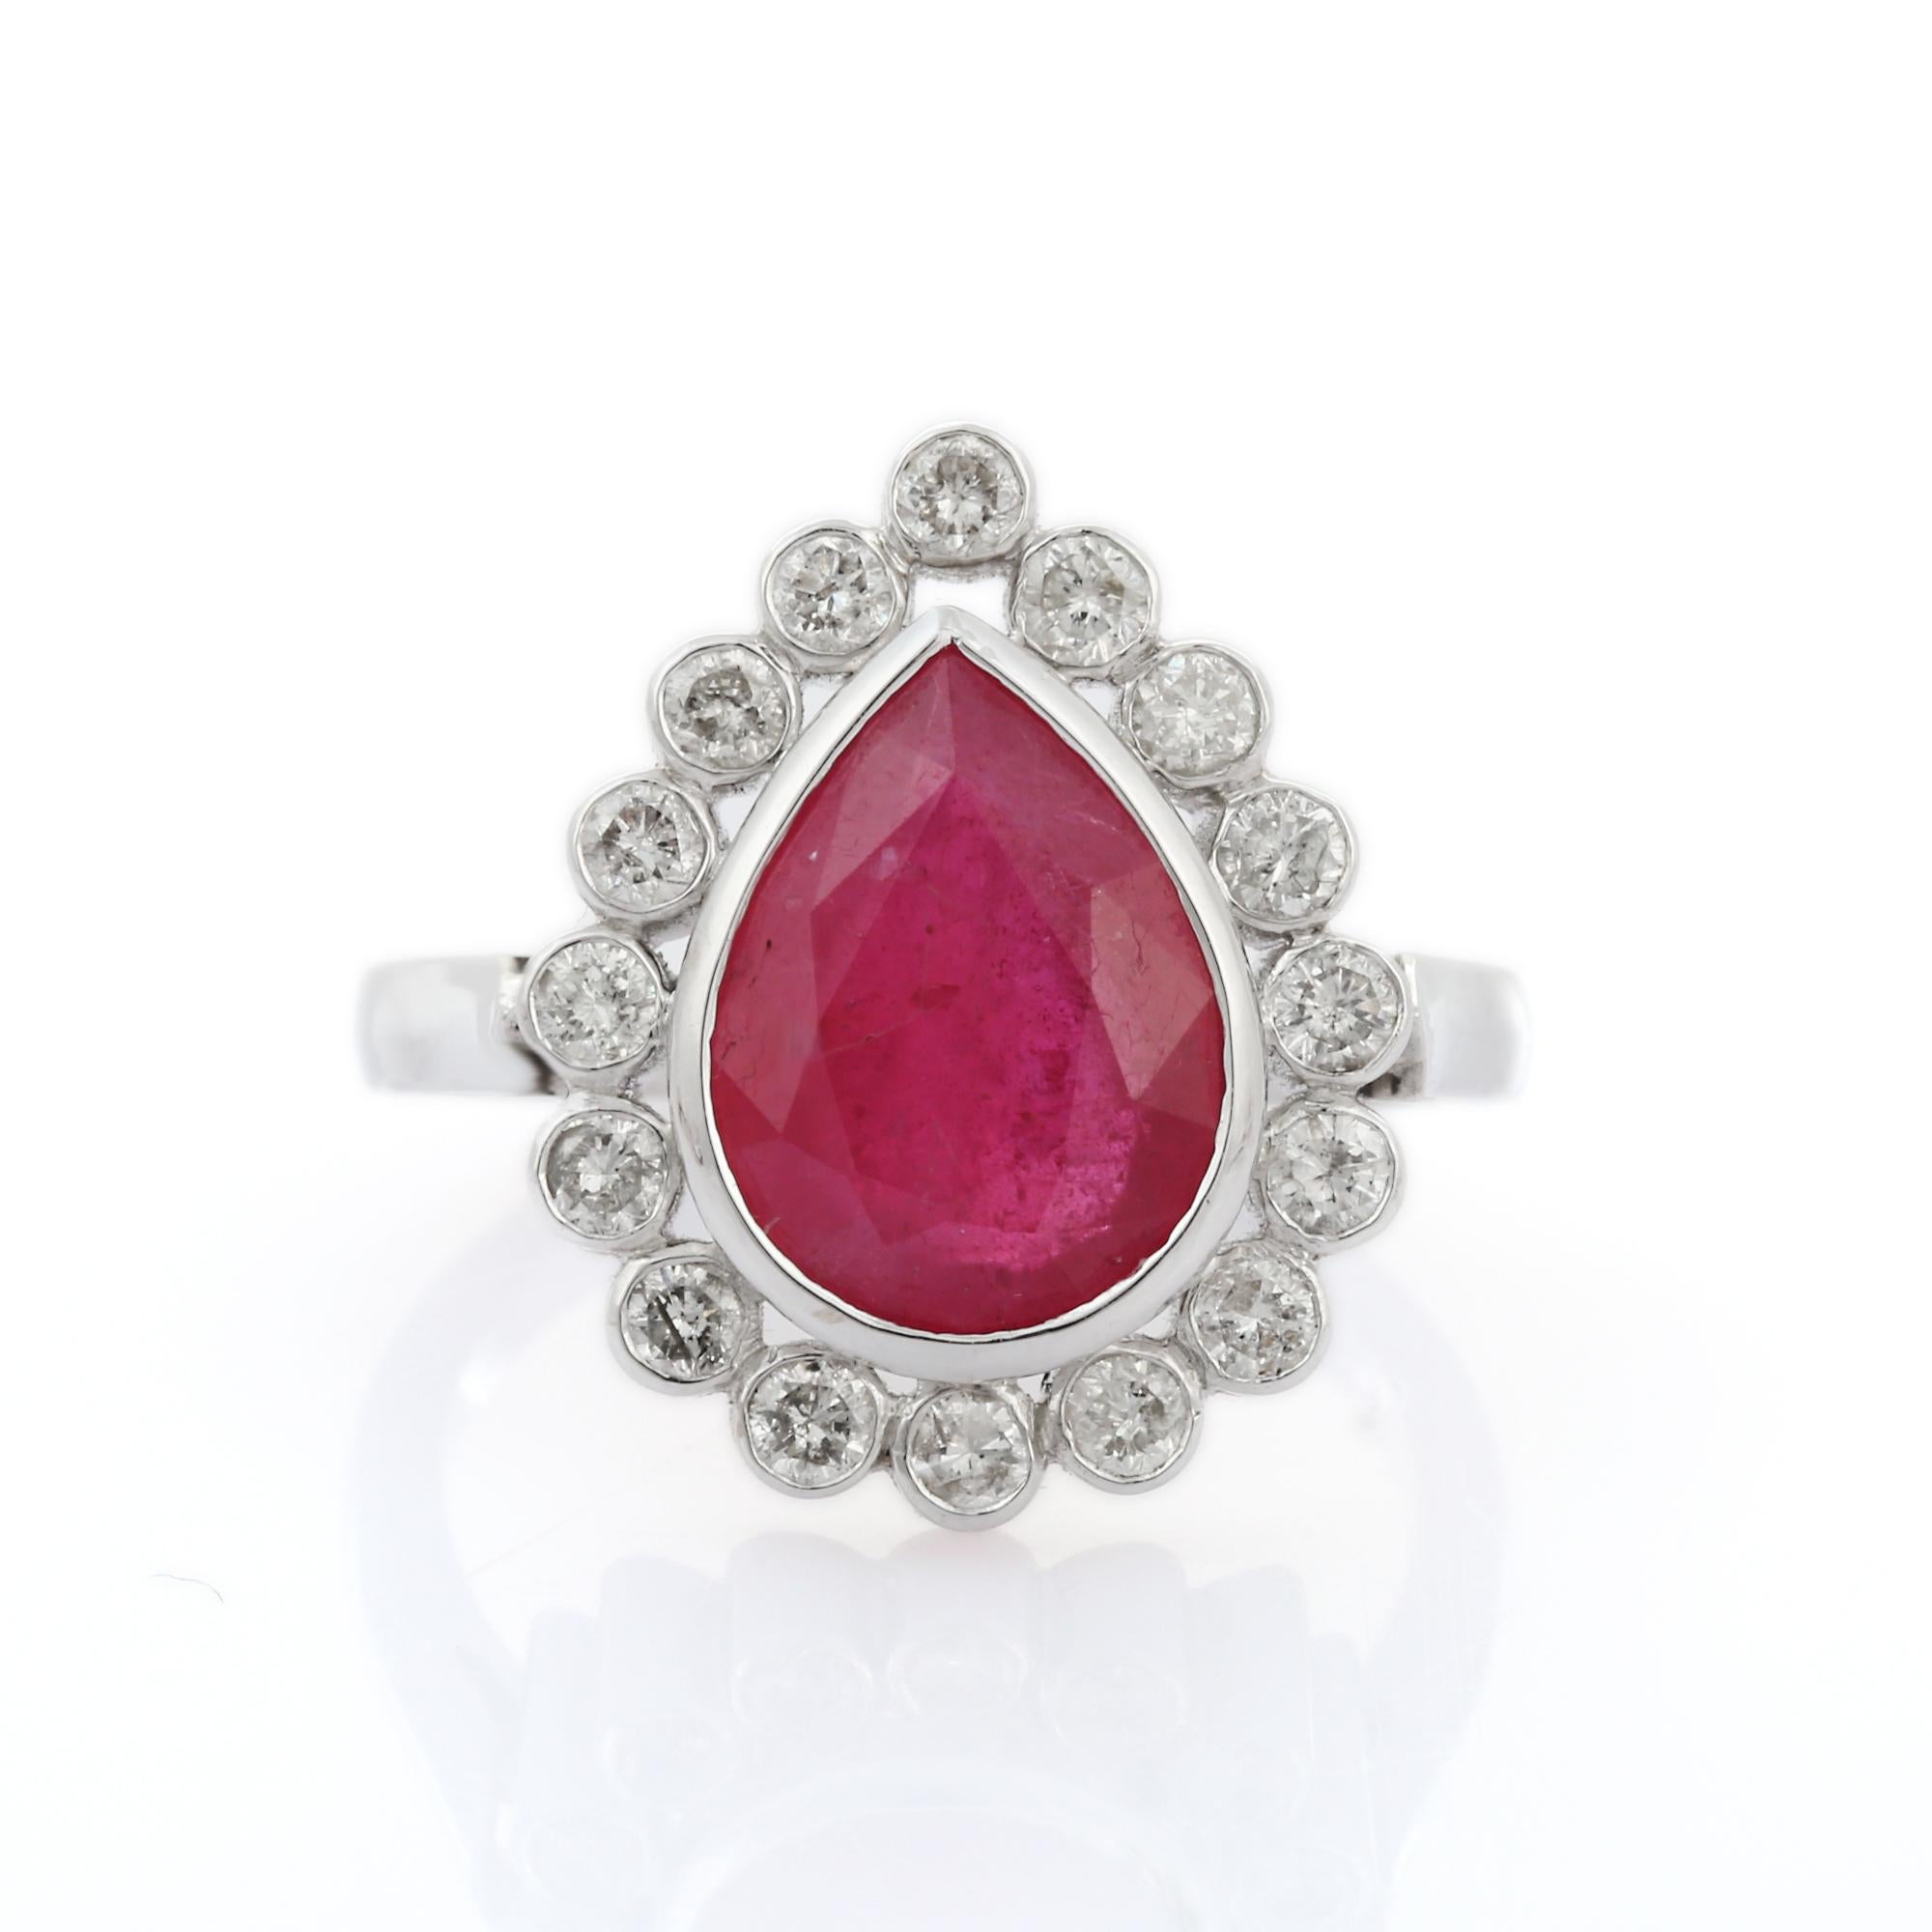 For Sale:  18K White Gold Pear Cut Ruby Cocktail Ring with Diamonds 8